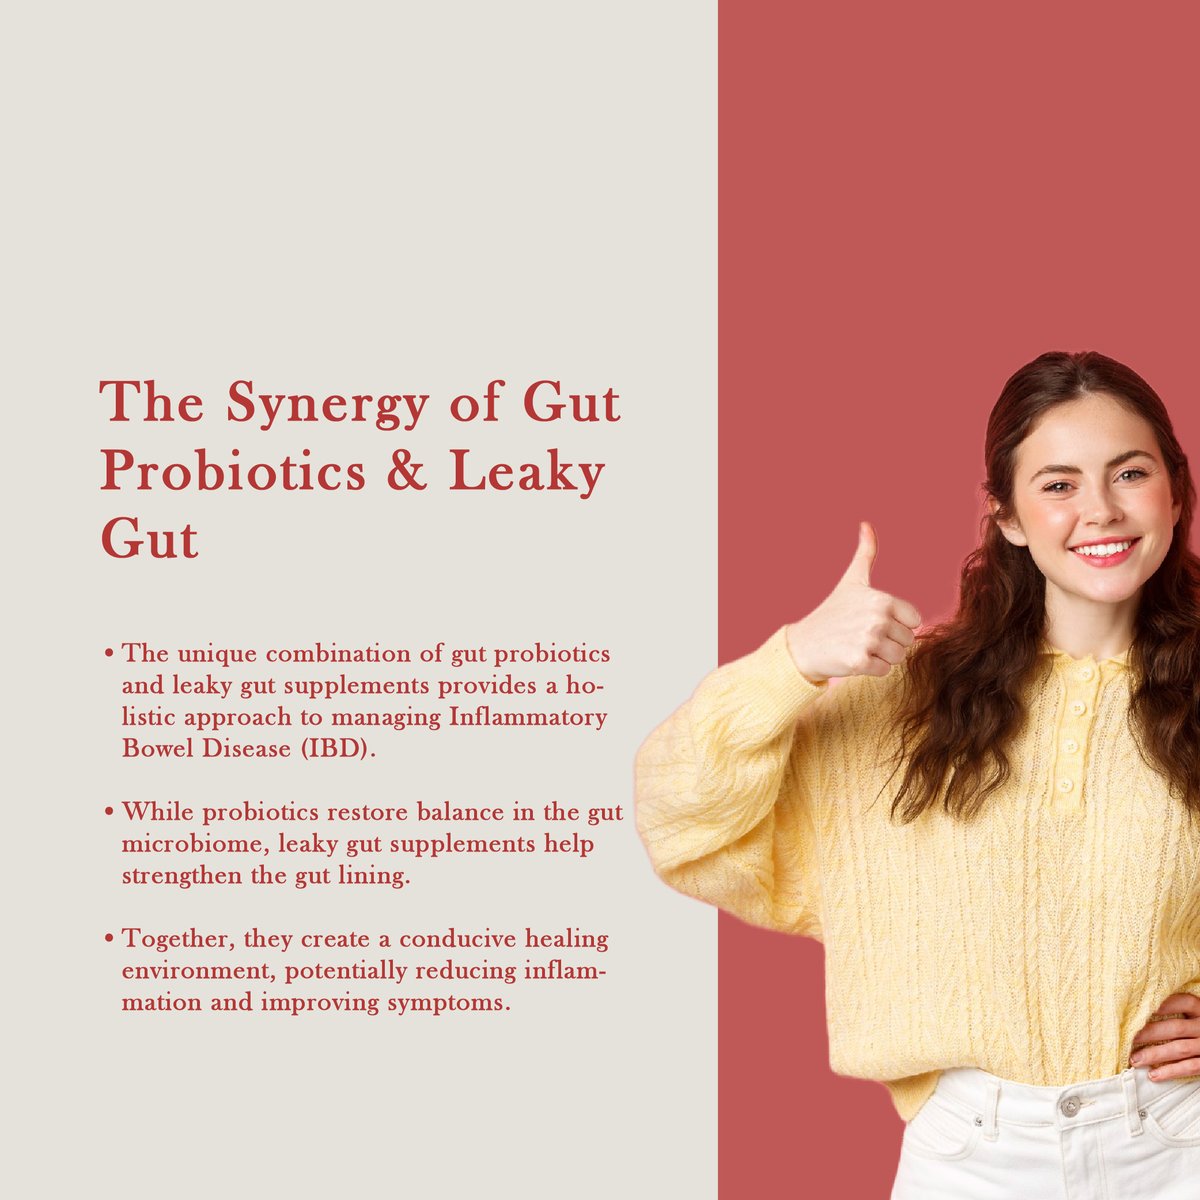 Gut Health Matters! 🌱 Learn about the impact of Crohn's and Ulcerative Colitis on the digestive system and ways to manage symptoms. Click the link in the bio to read more! #GutHealth #IBDManagement #IBDAwareness #CrohnsAndColitis #SelfCare #GutEze #IBDCare #SpreadAwareness